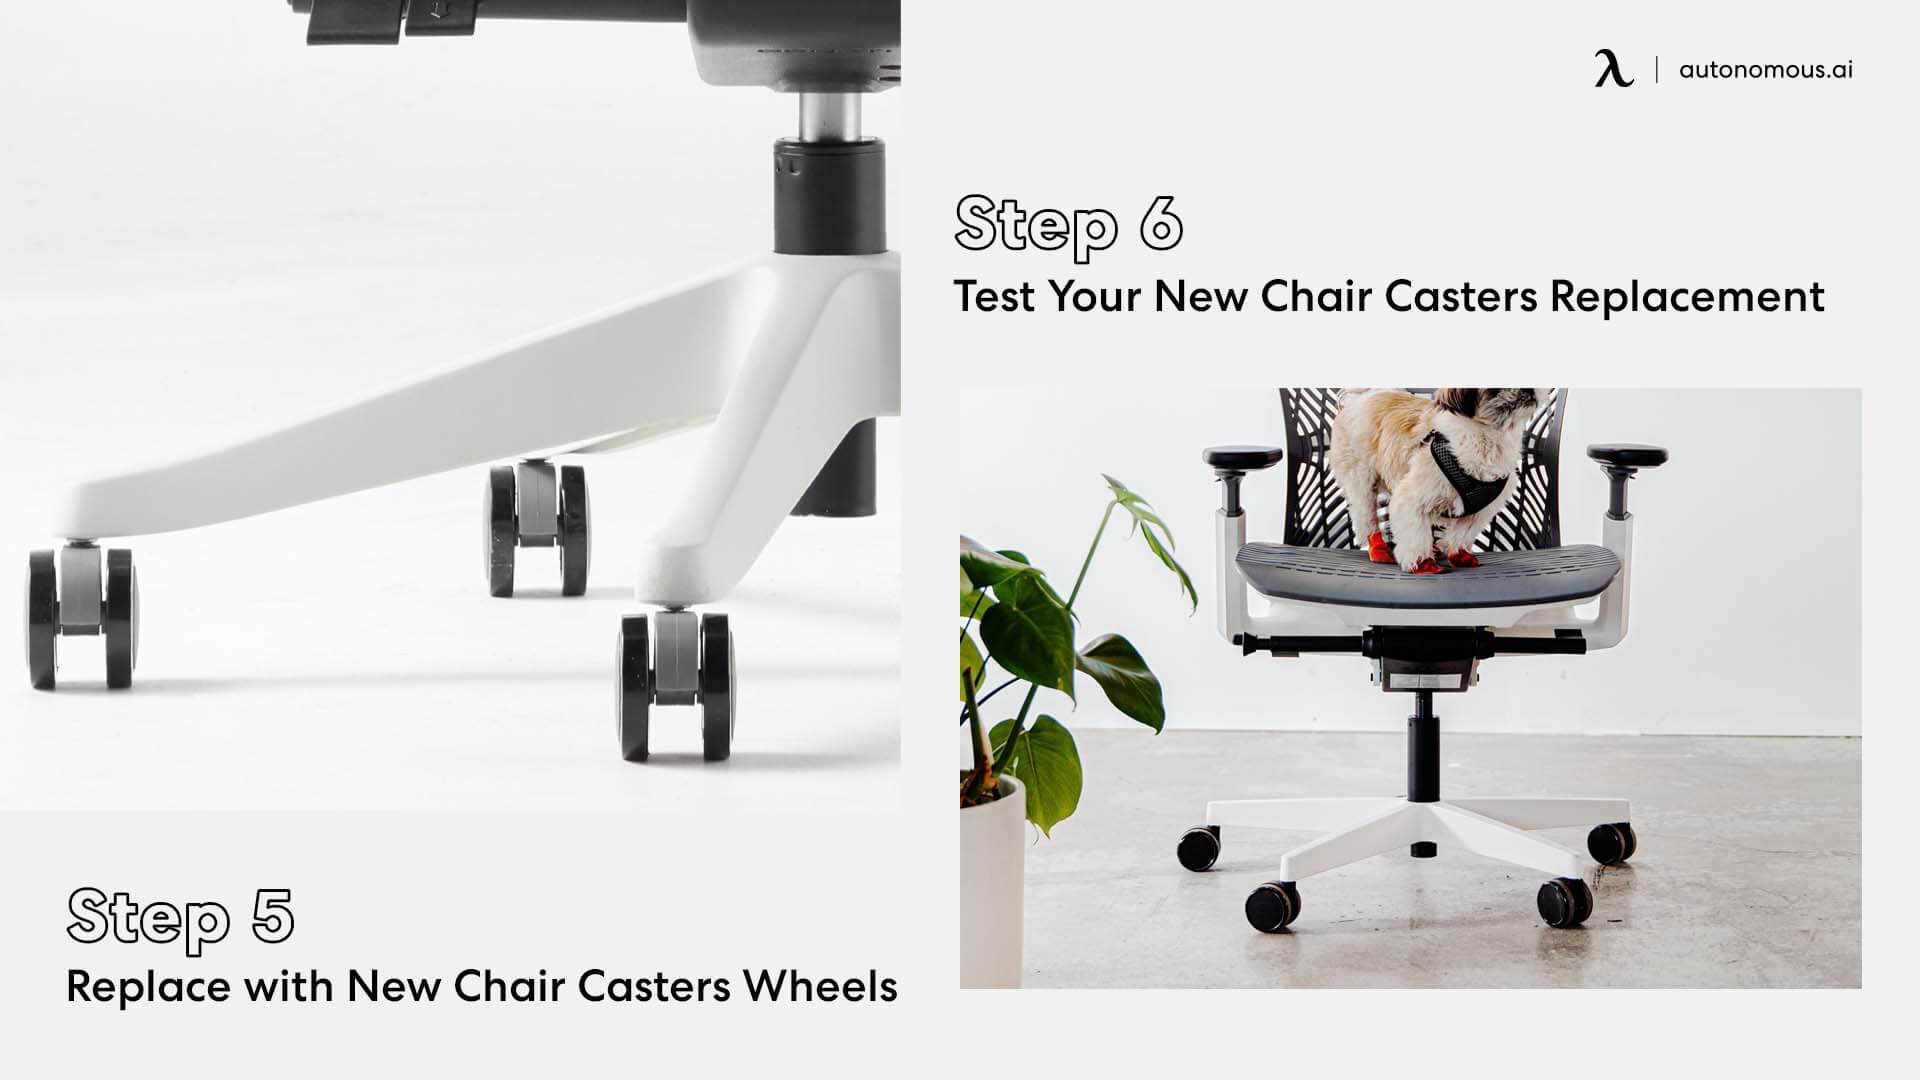 Replace with new chair casters and test